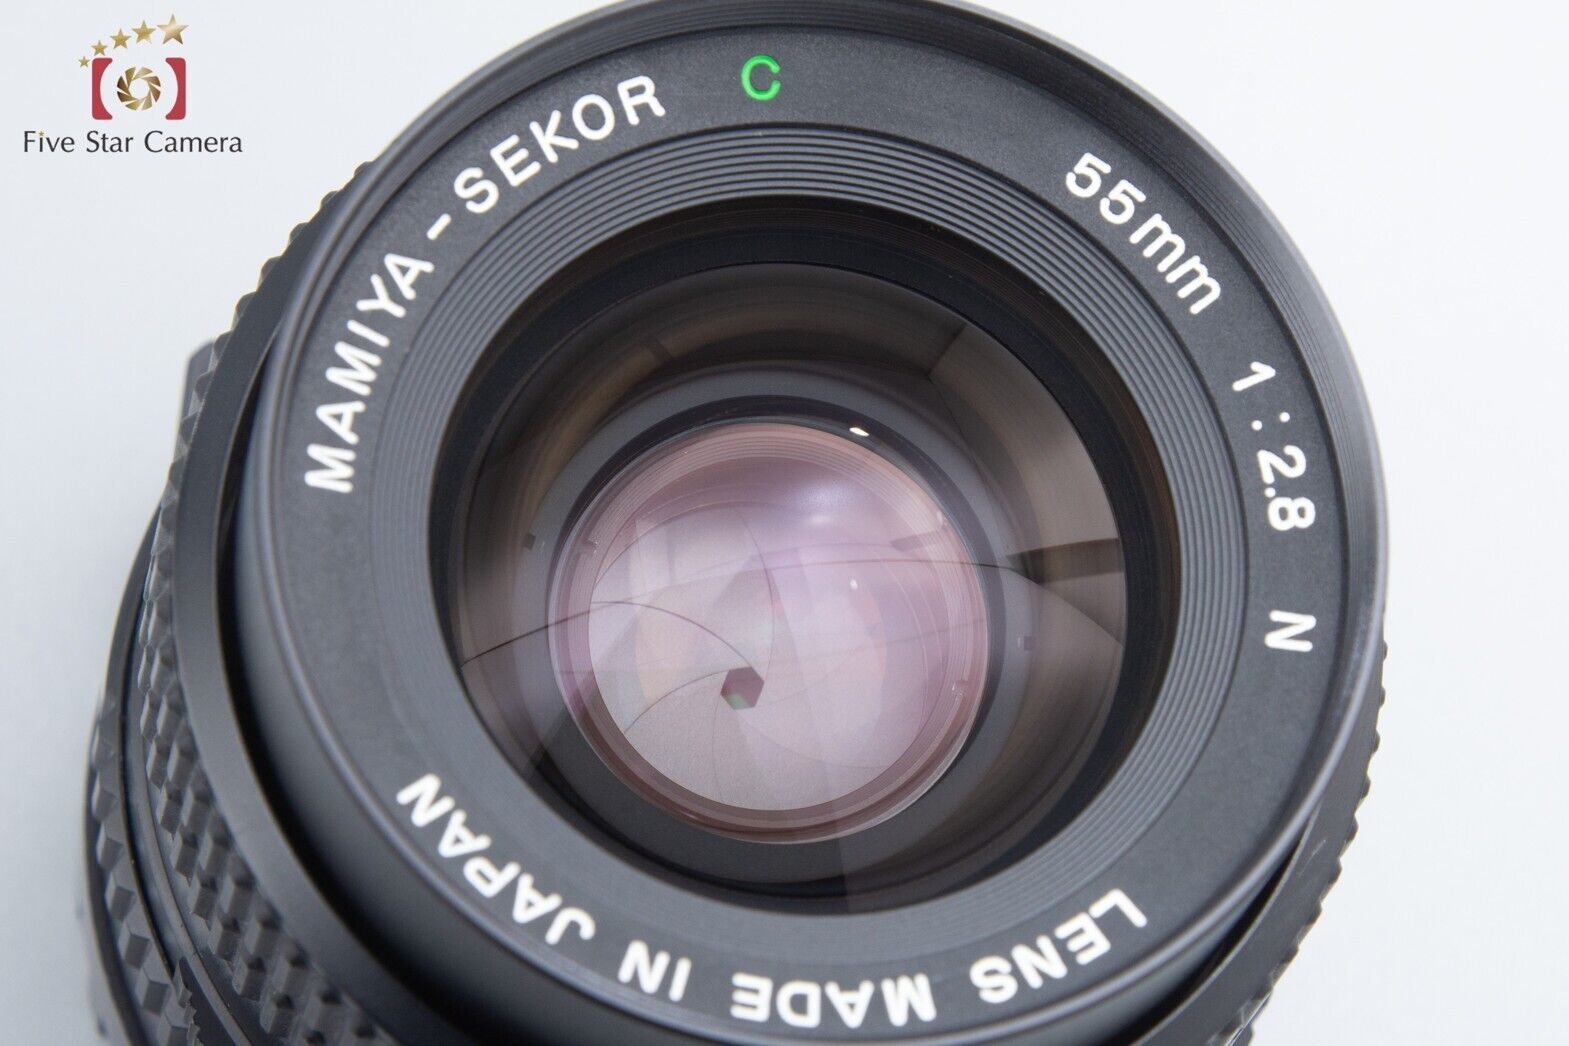 Excellent!! Mamiya SEKOR C 55mm f/2.8 N for 645